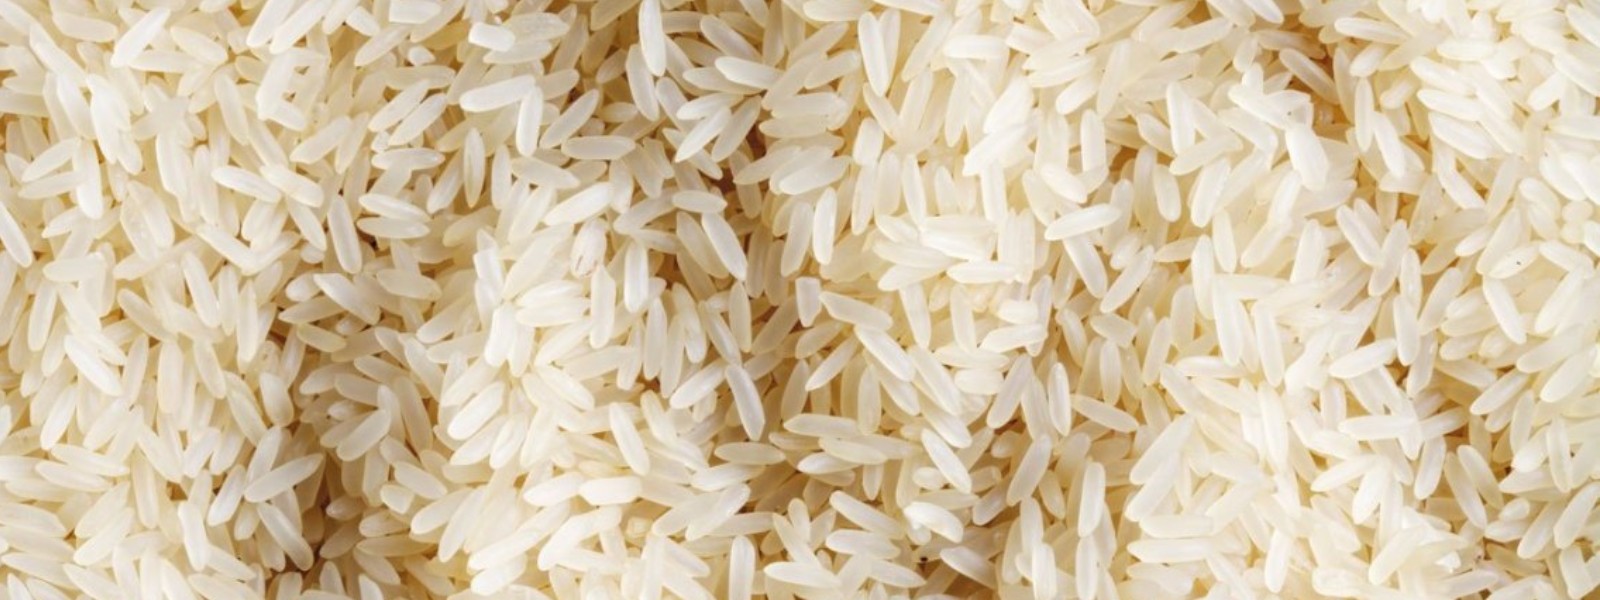 Imported nadu rice priced at Rs. 98/-, to be sold from today